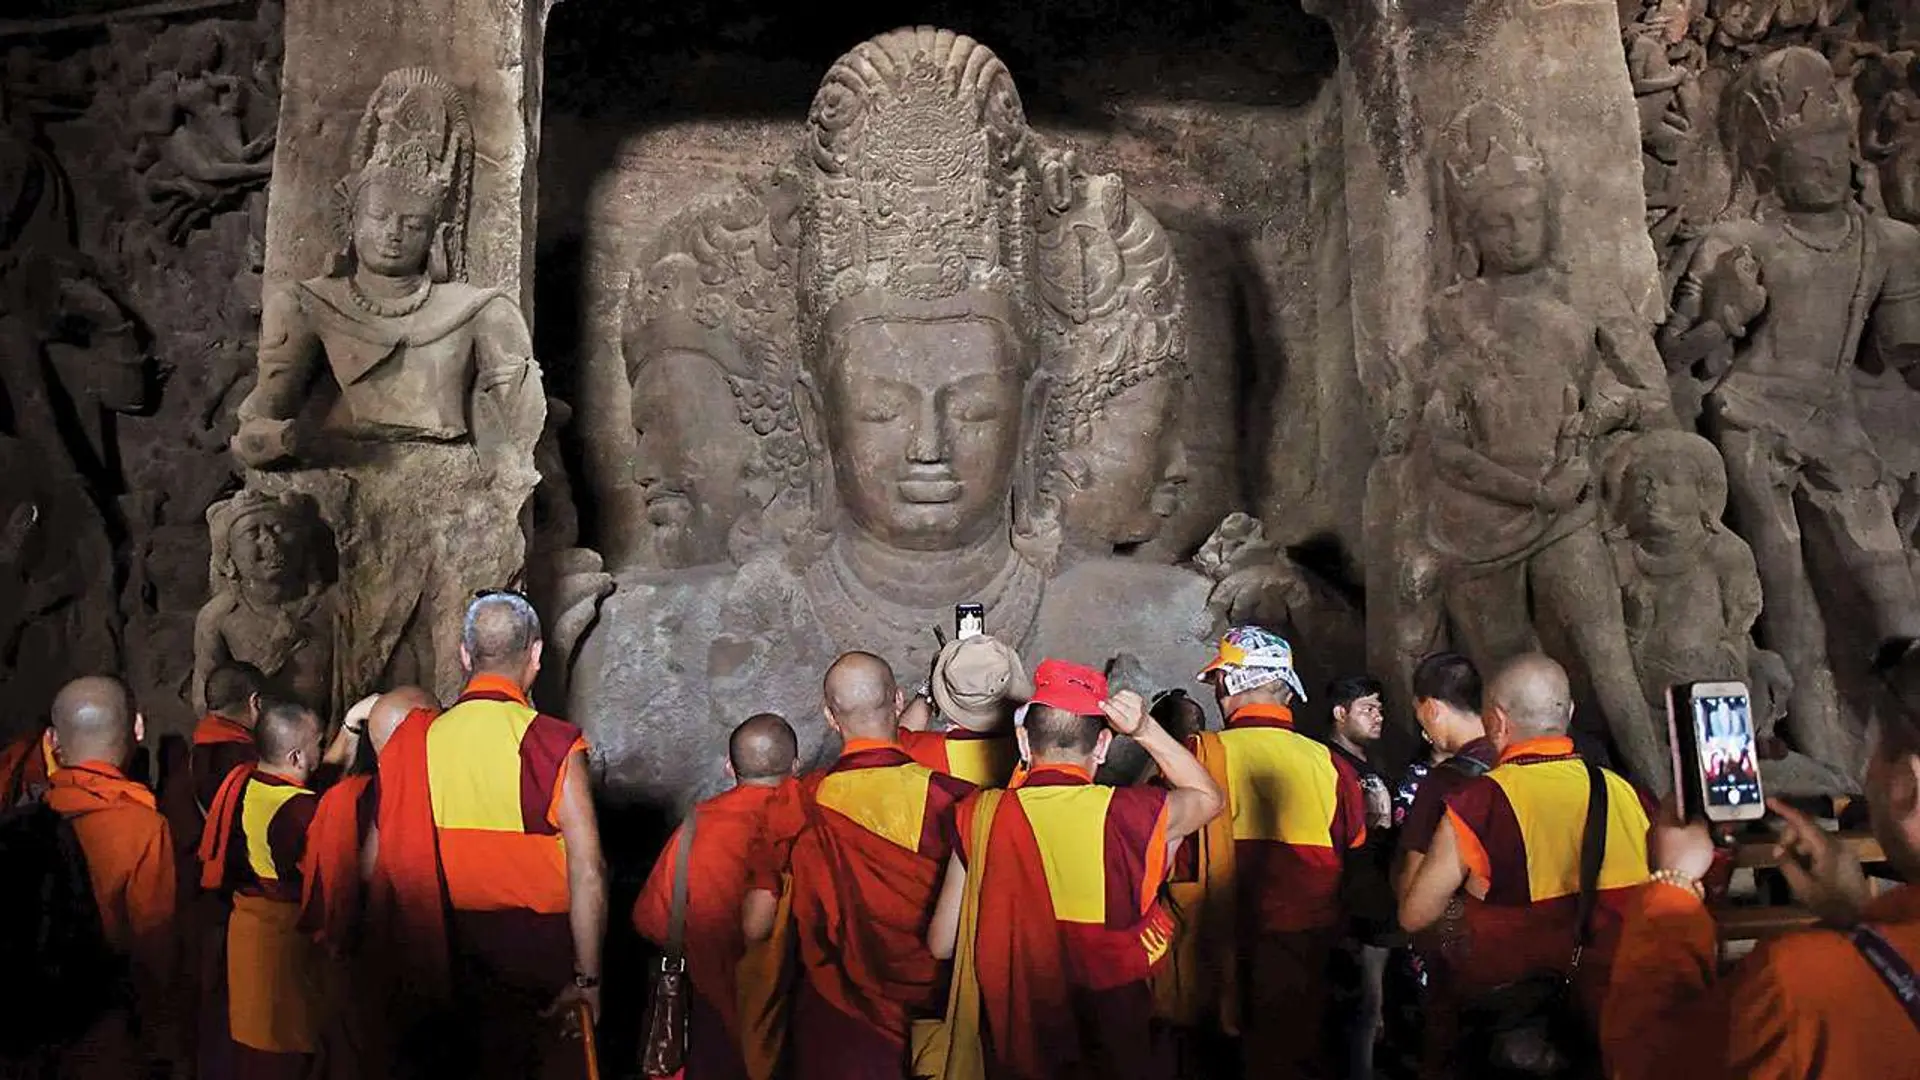 People in red and yellow outfits taking photographs of Buddha like stone engraved statues, this is known as Trimurti in the elephanta caves, Mumbai